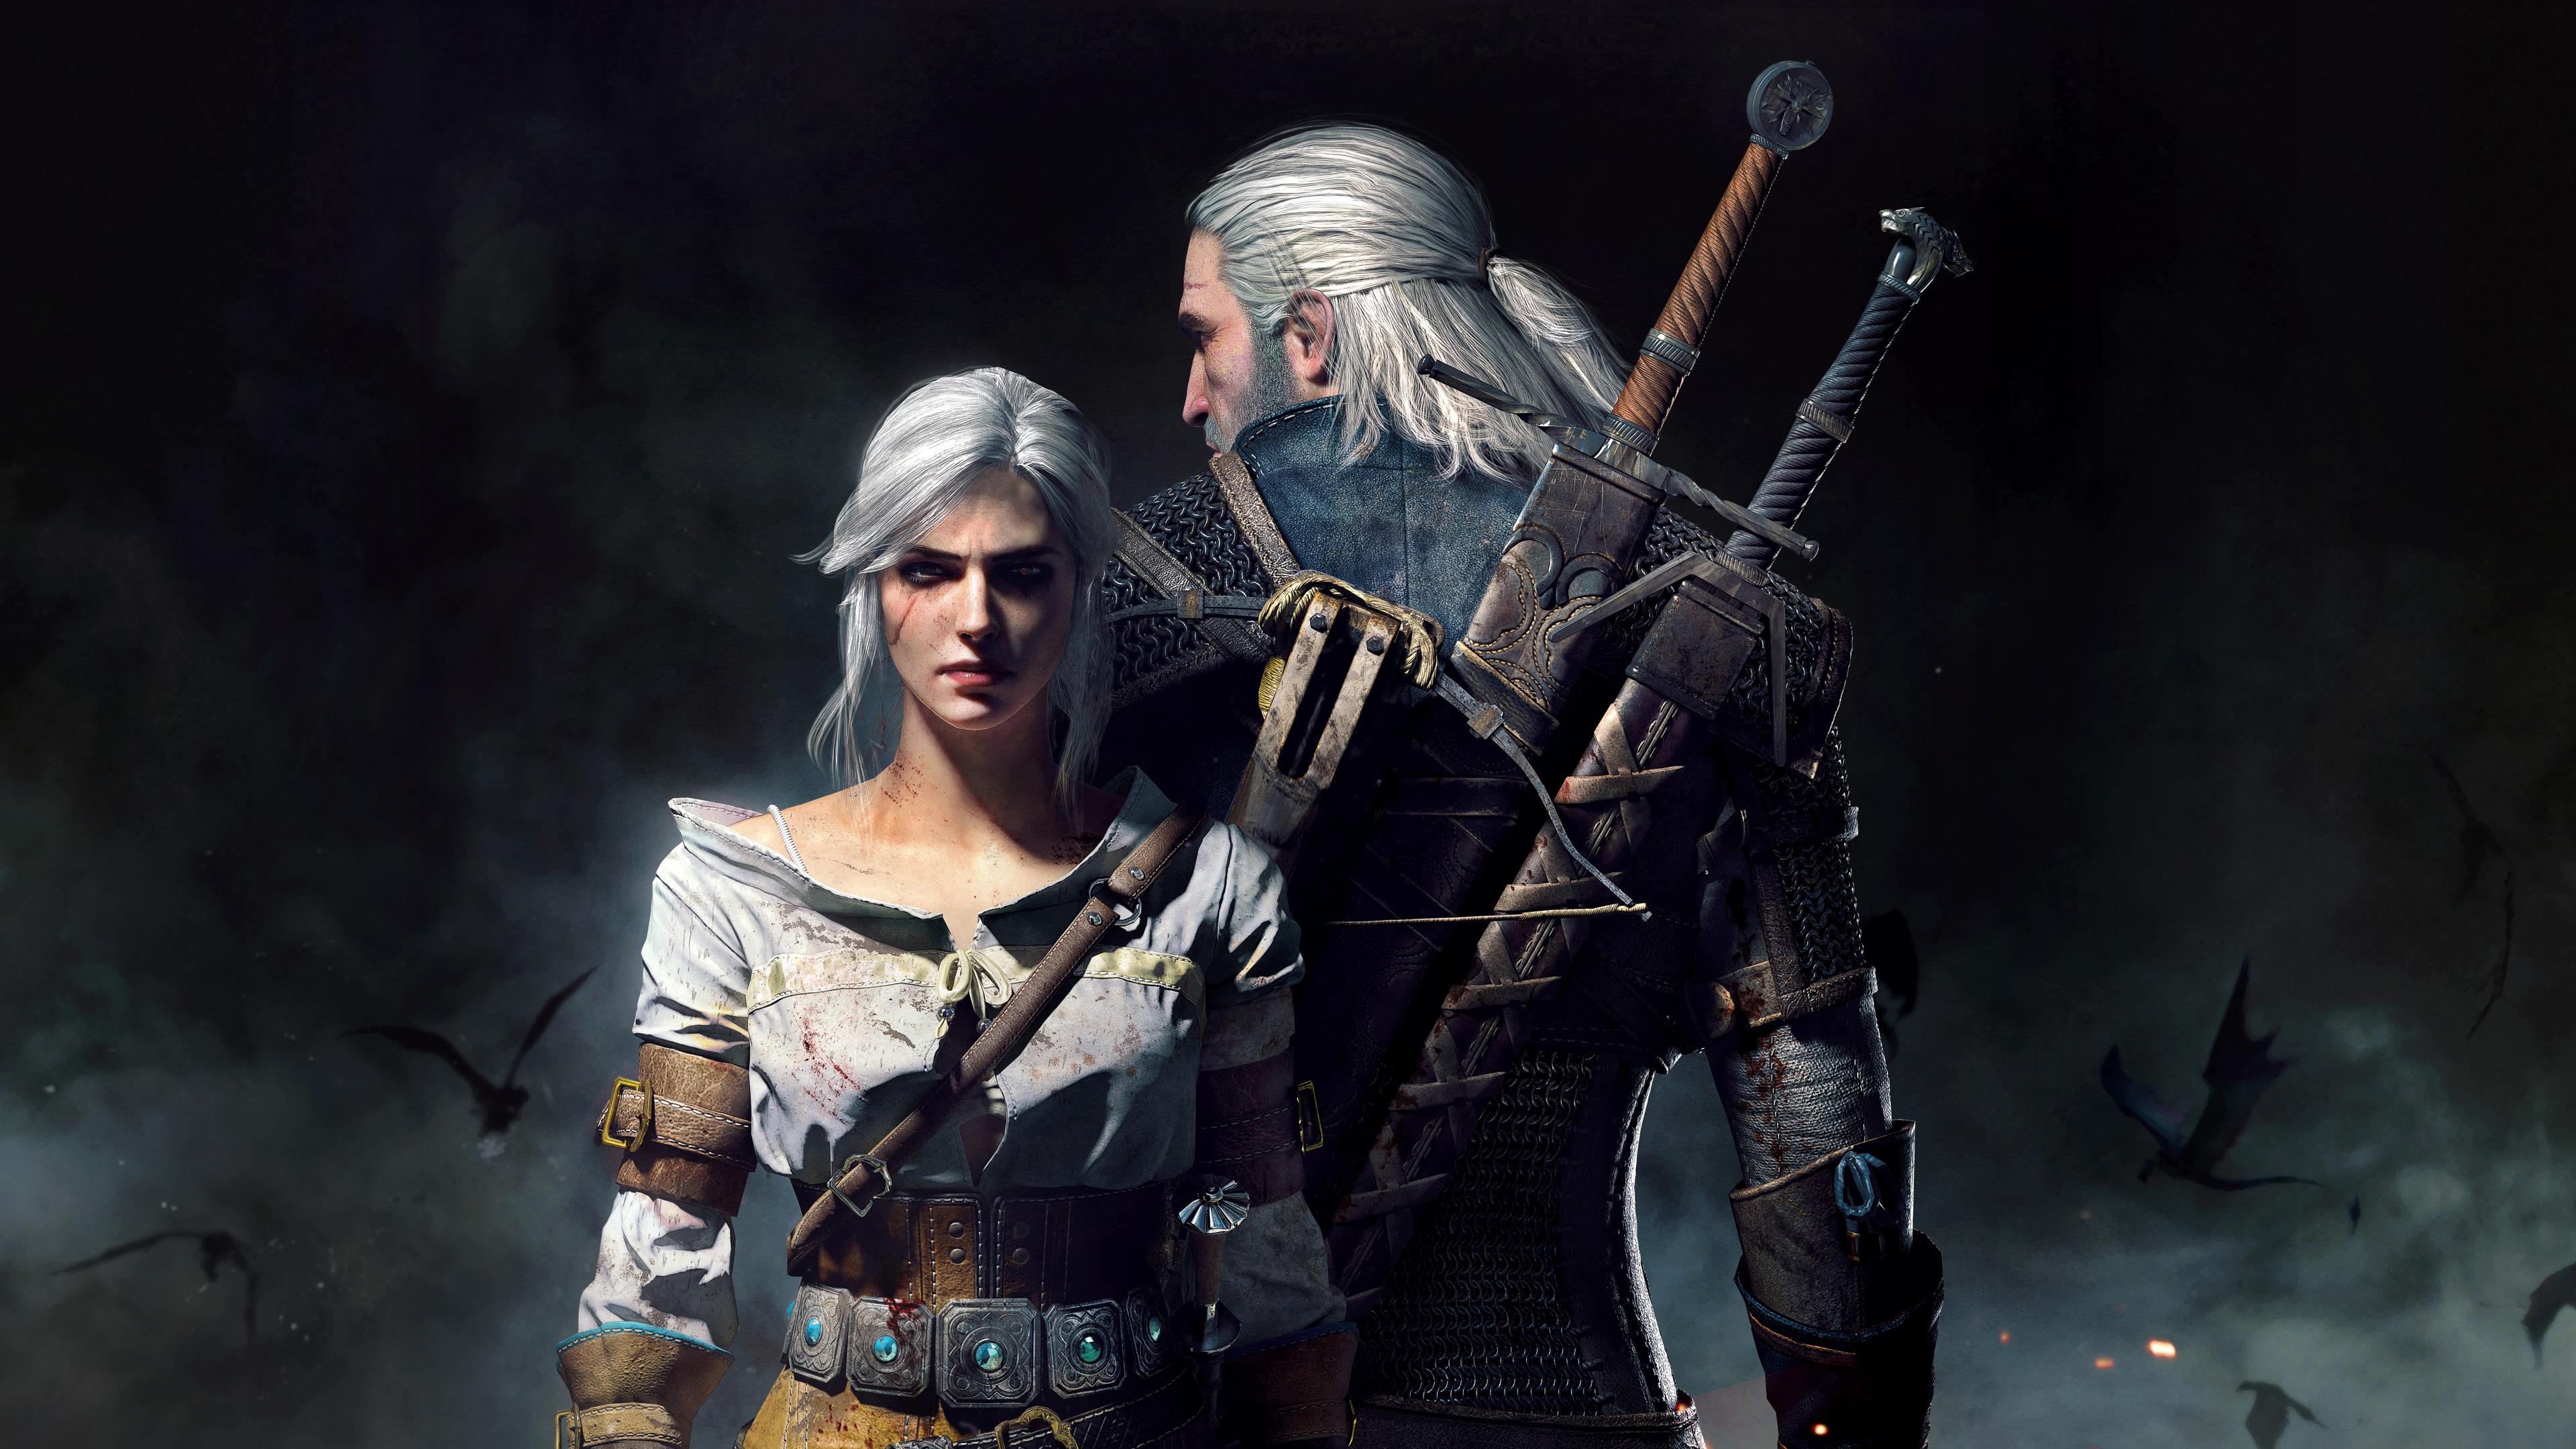 The Witcher 3 - Geralt and Ciri